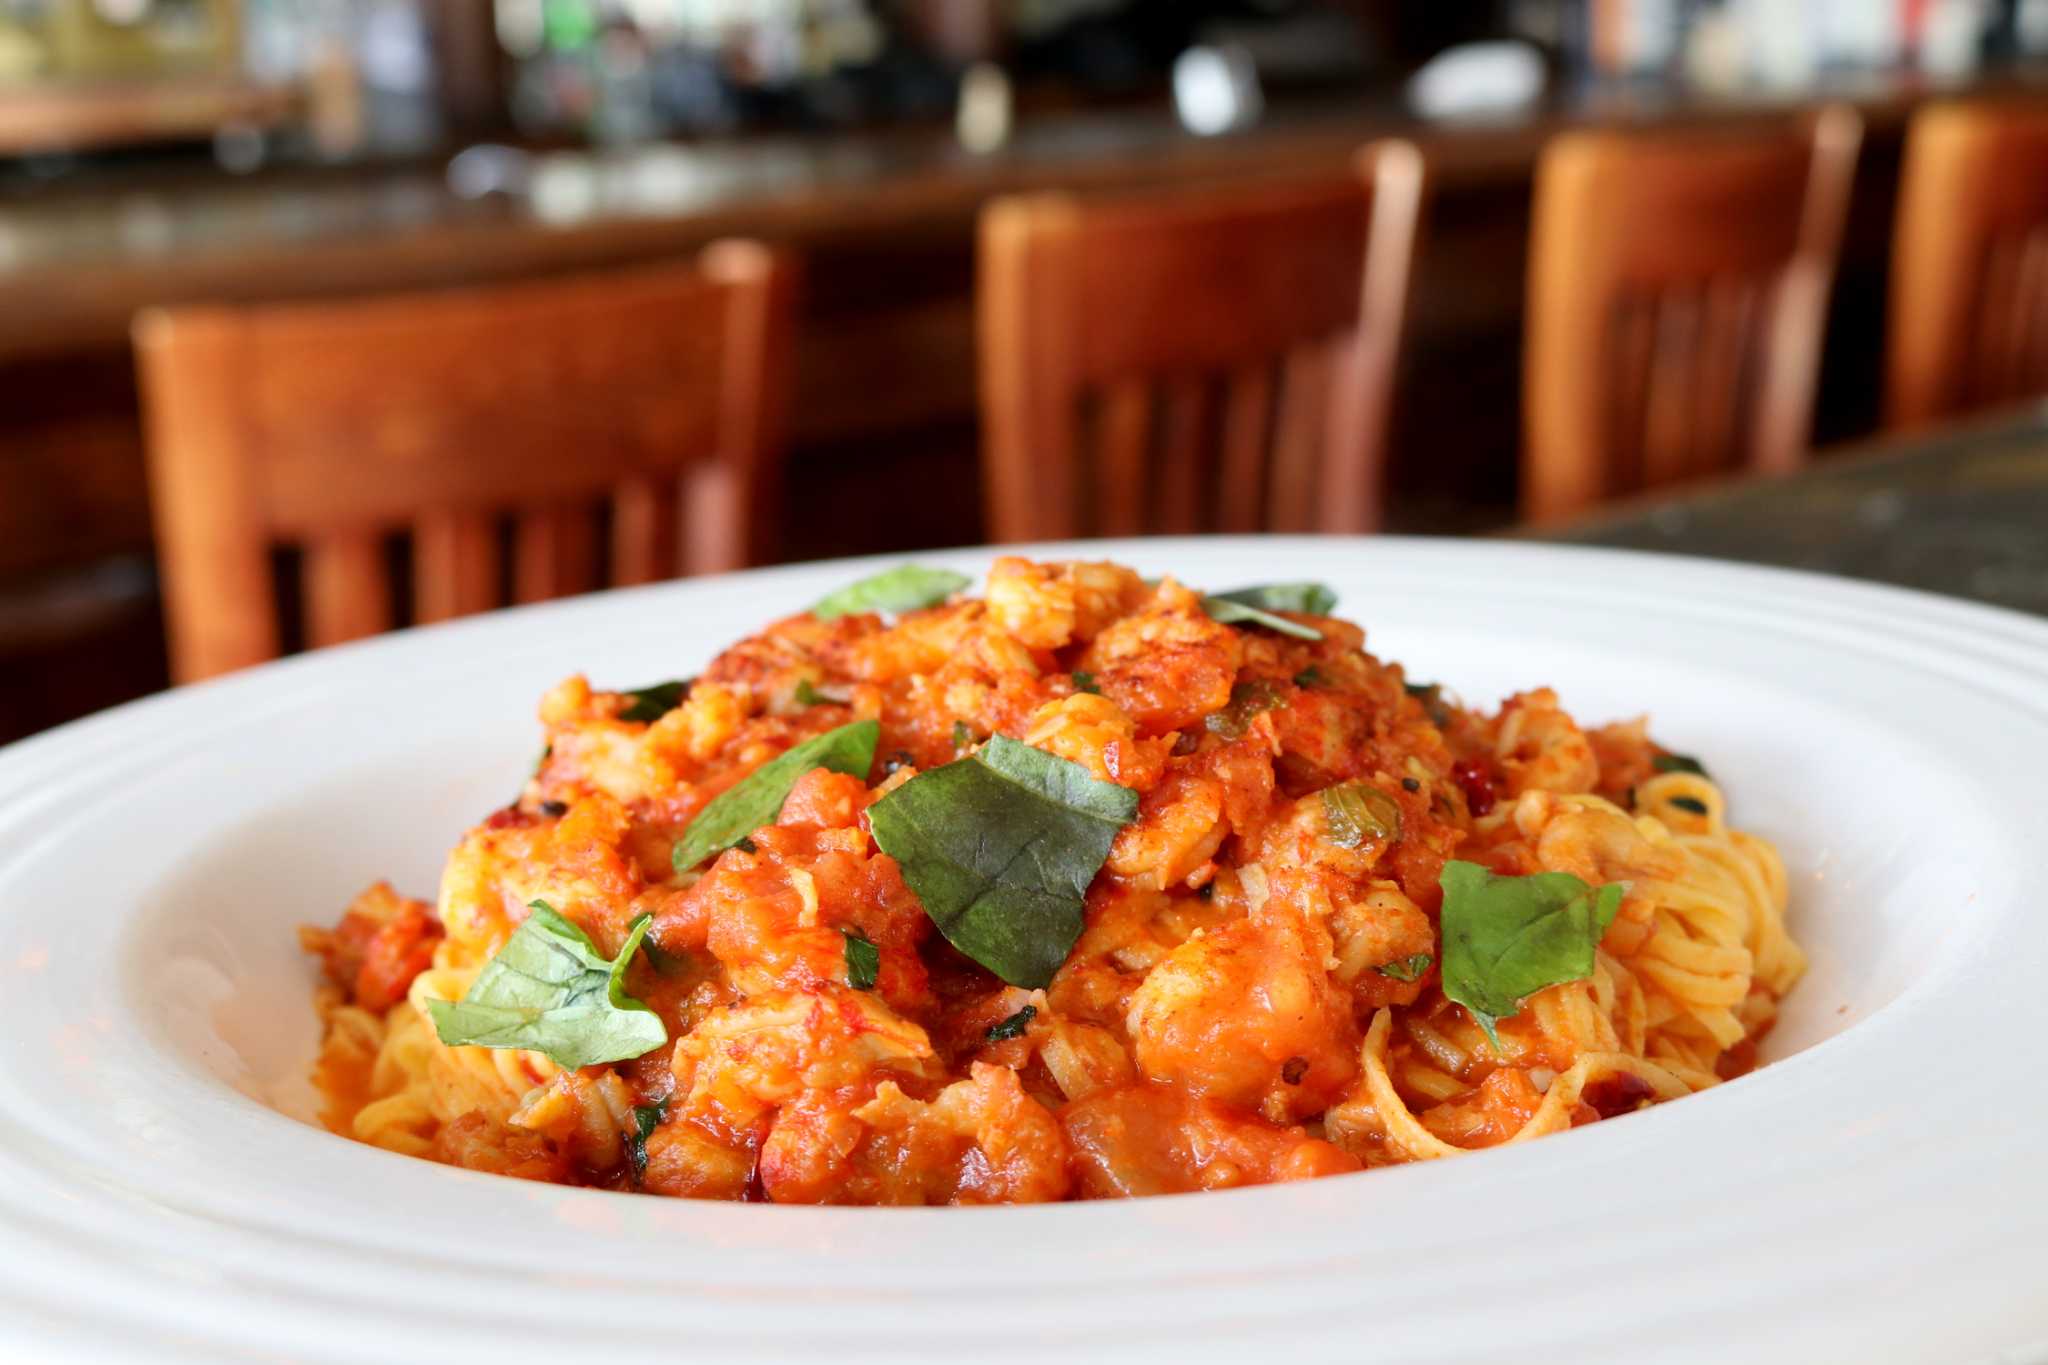 41-year-old Houston restaurant will serve its last plate of pasta